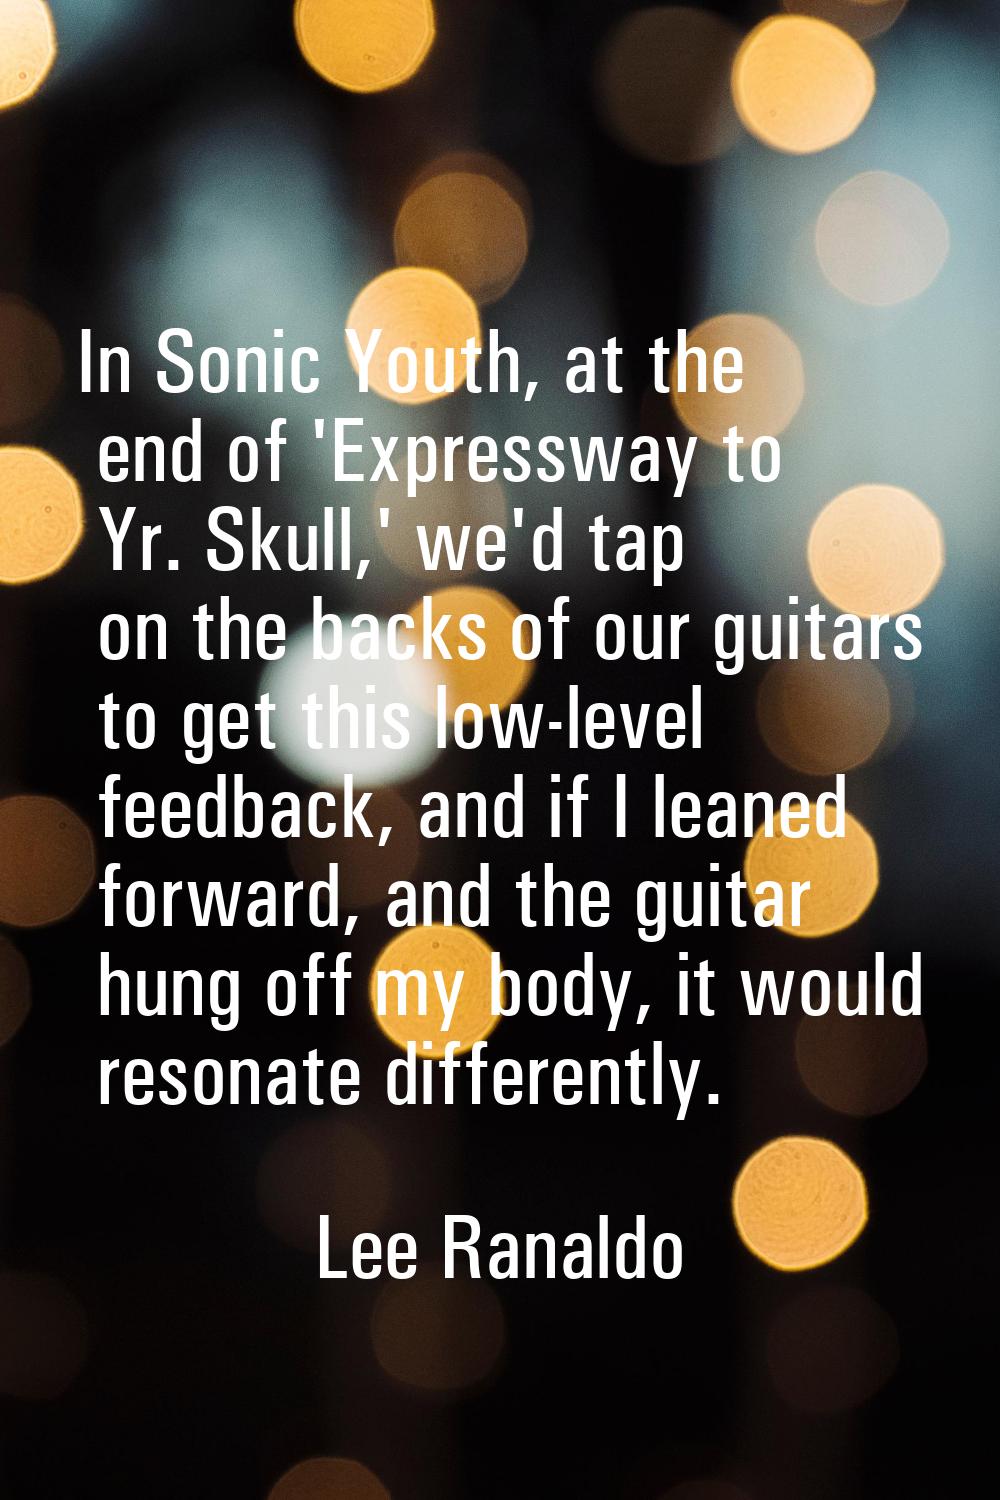 In Sonic Youth, at the end of 'Expressway to Yr. Skull,' we'd tap on the backs of our guitars to ge